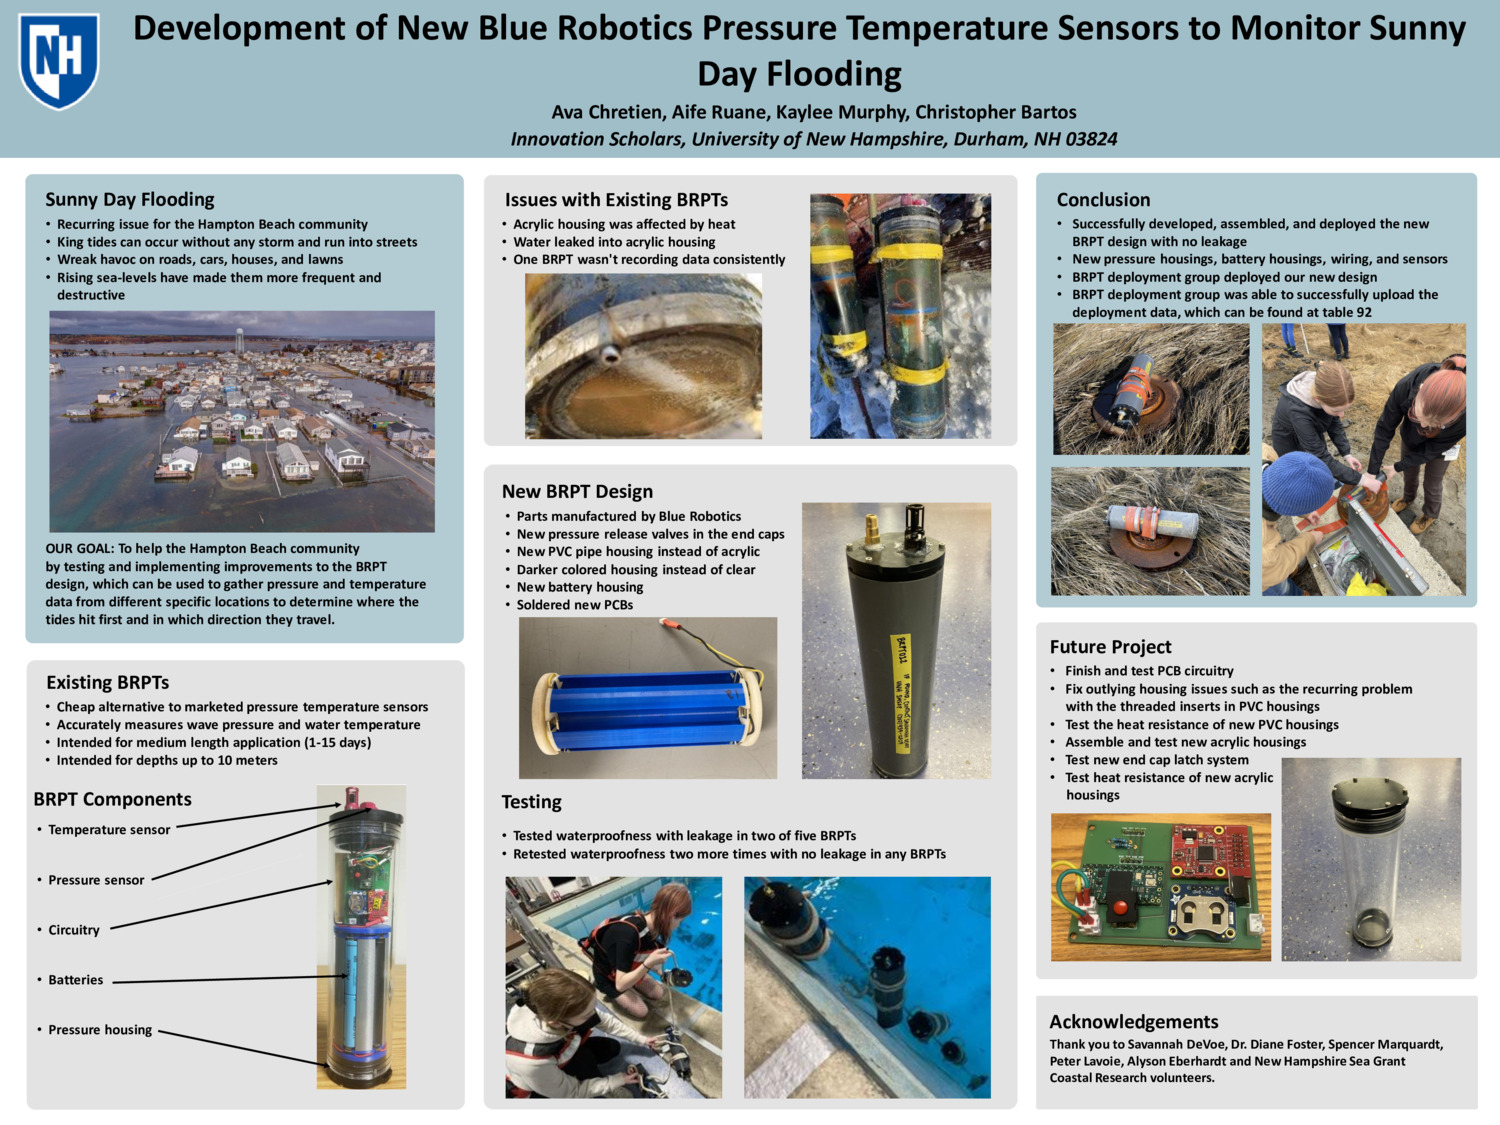 Development Of New Blue Robotics Pressure Temperature Sensors To Monitor Sunny Day Flooding by aac1109